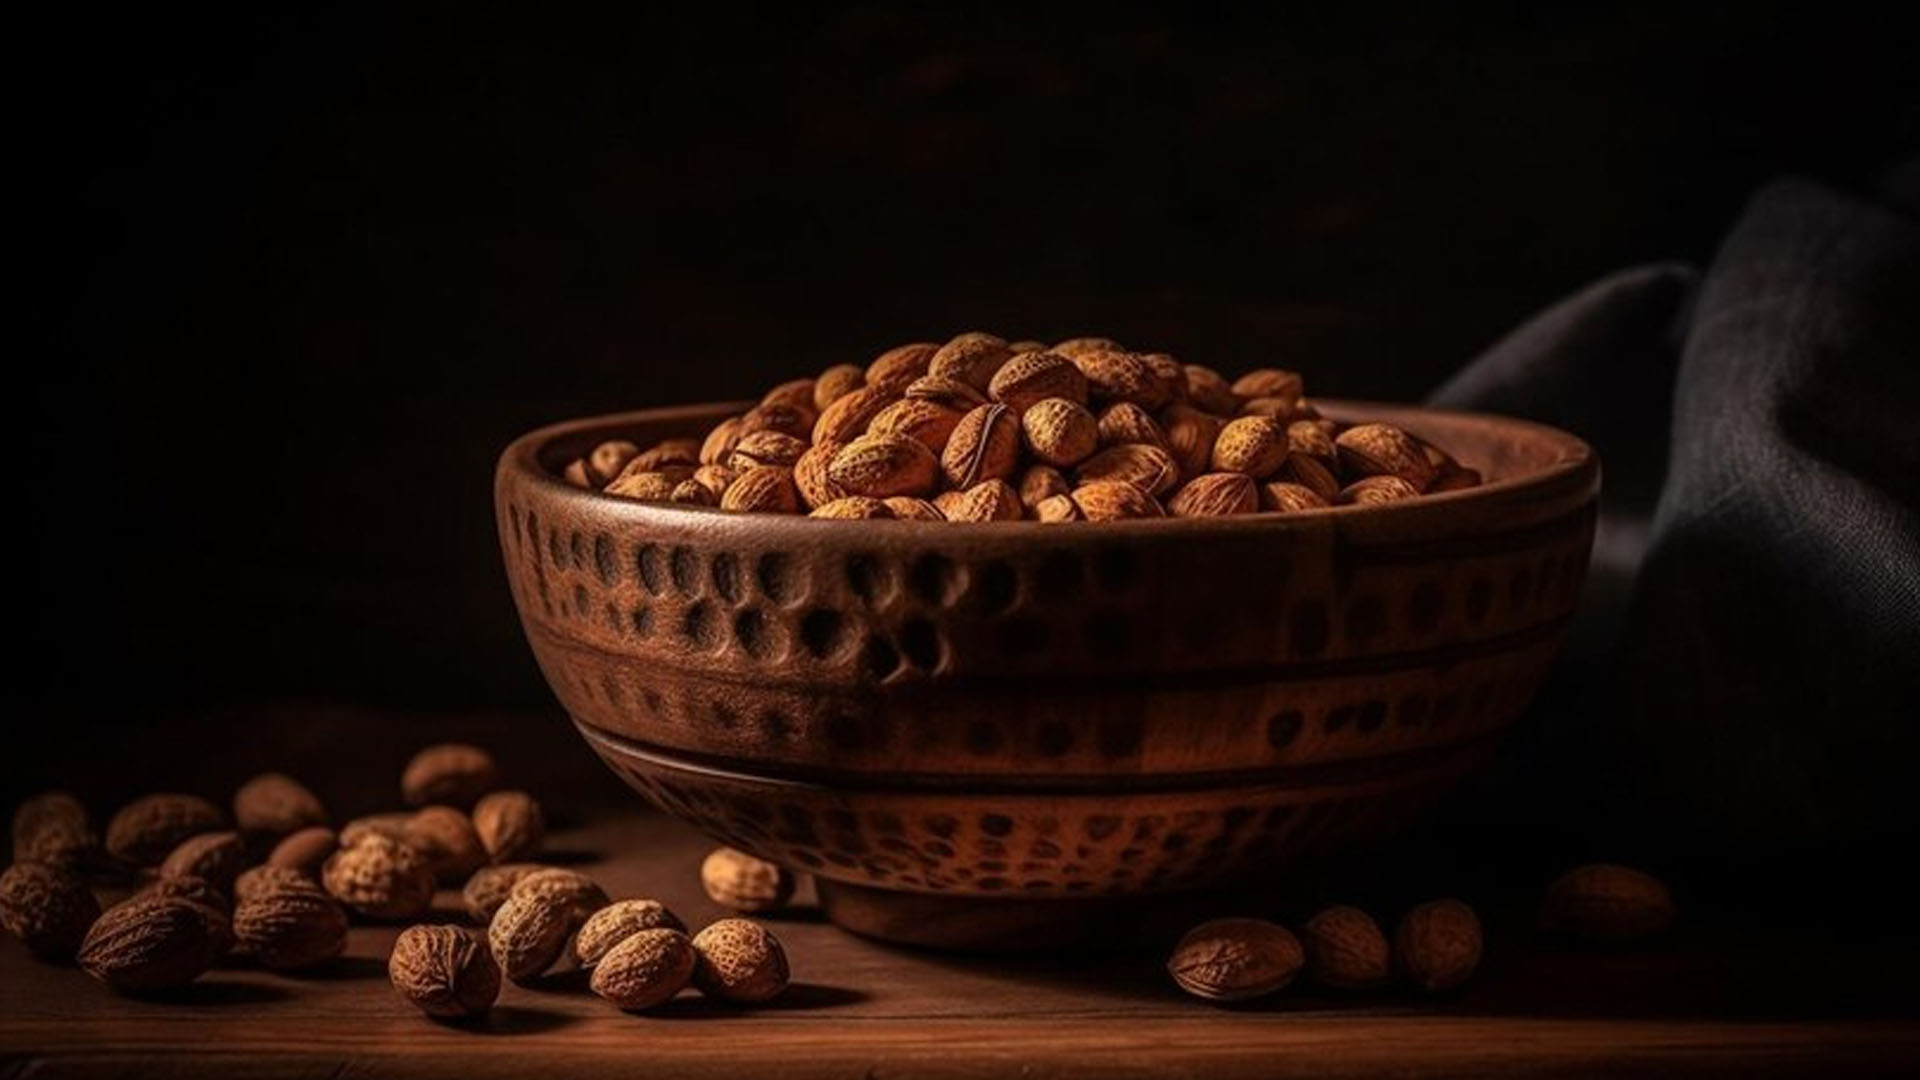 What Are The Health Benefits of Peanuts Nuts?